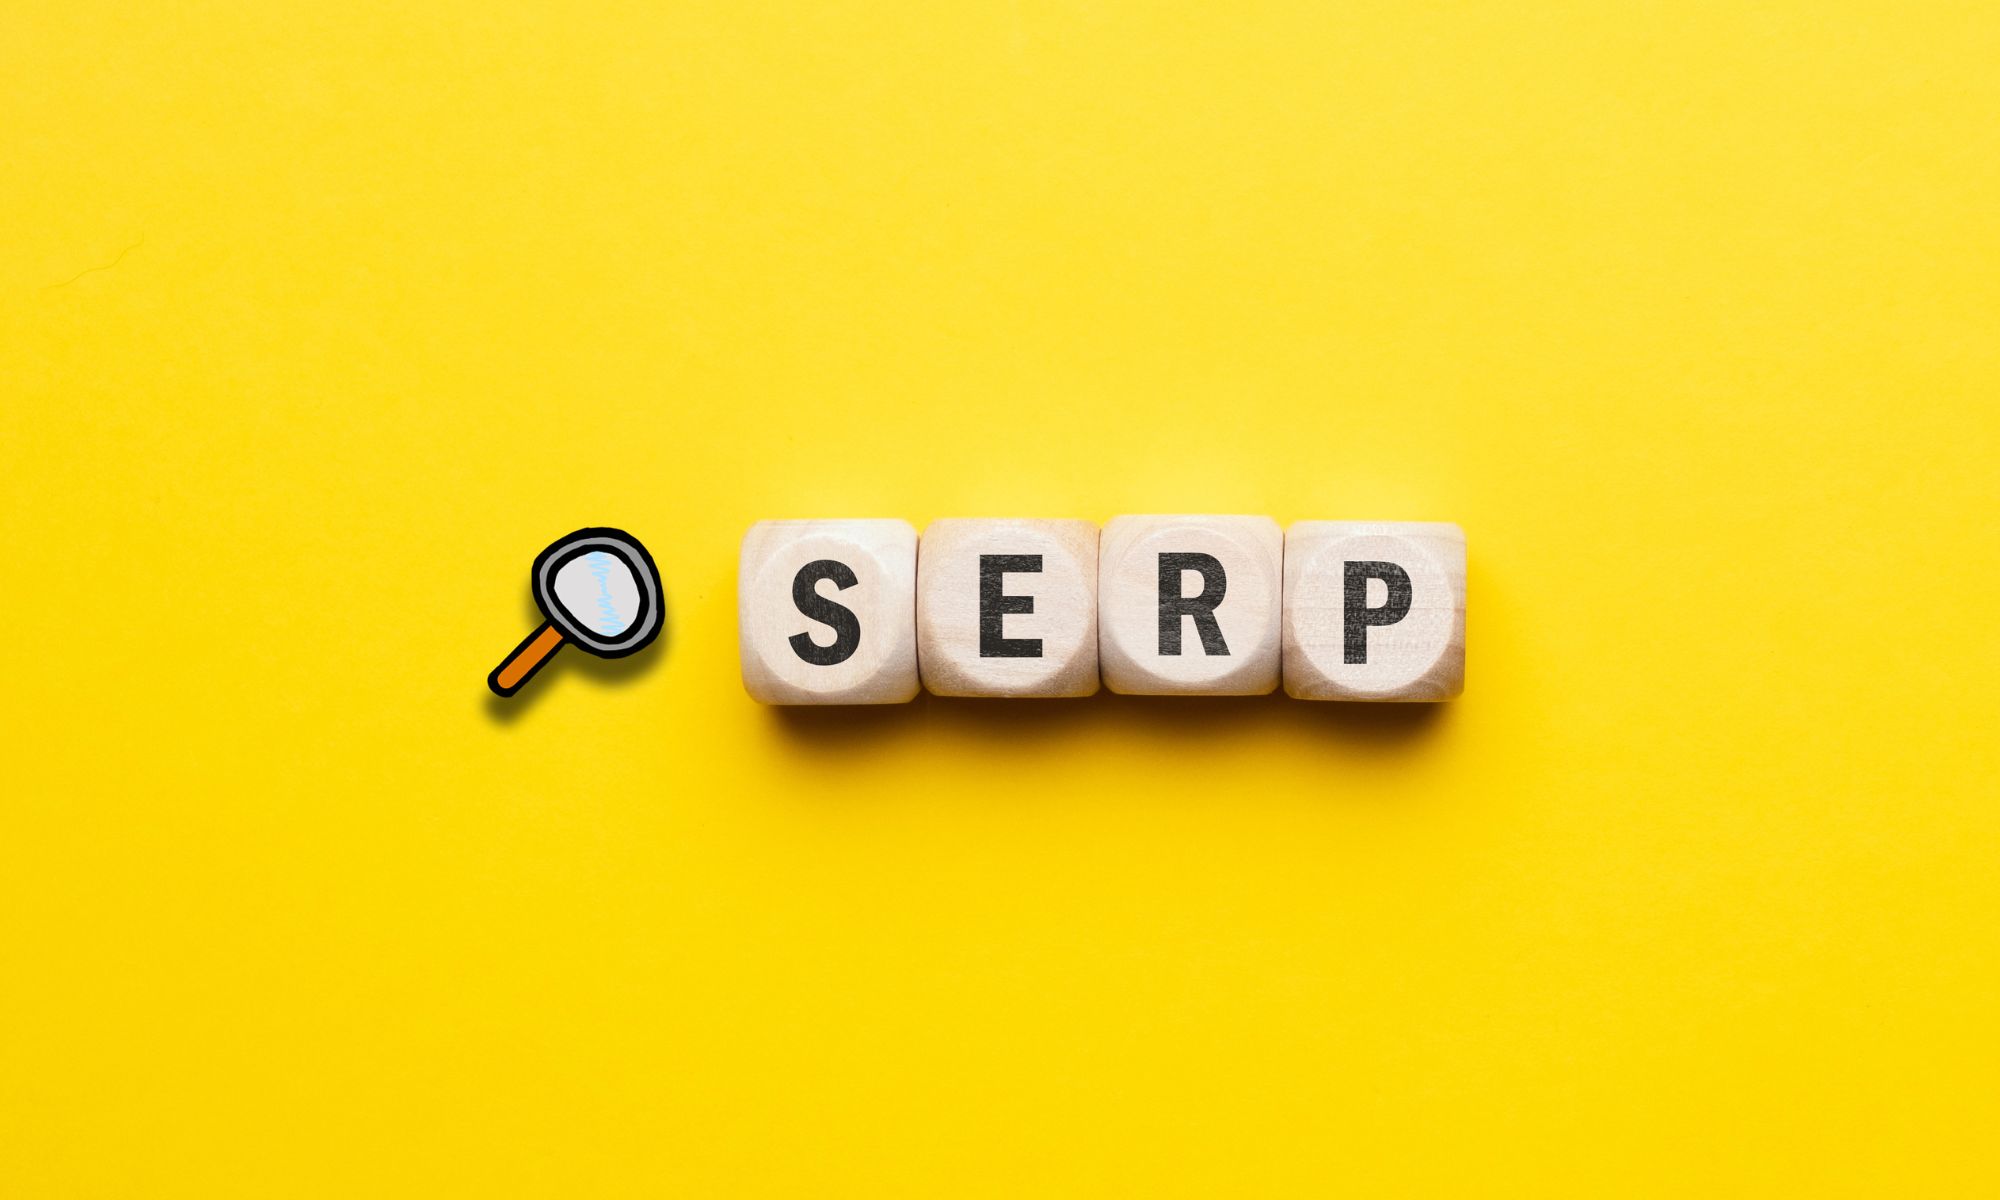 Marketing buzzword serp. Term Search engine results page with magnifying glass